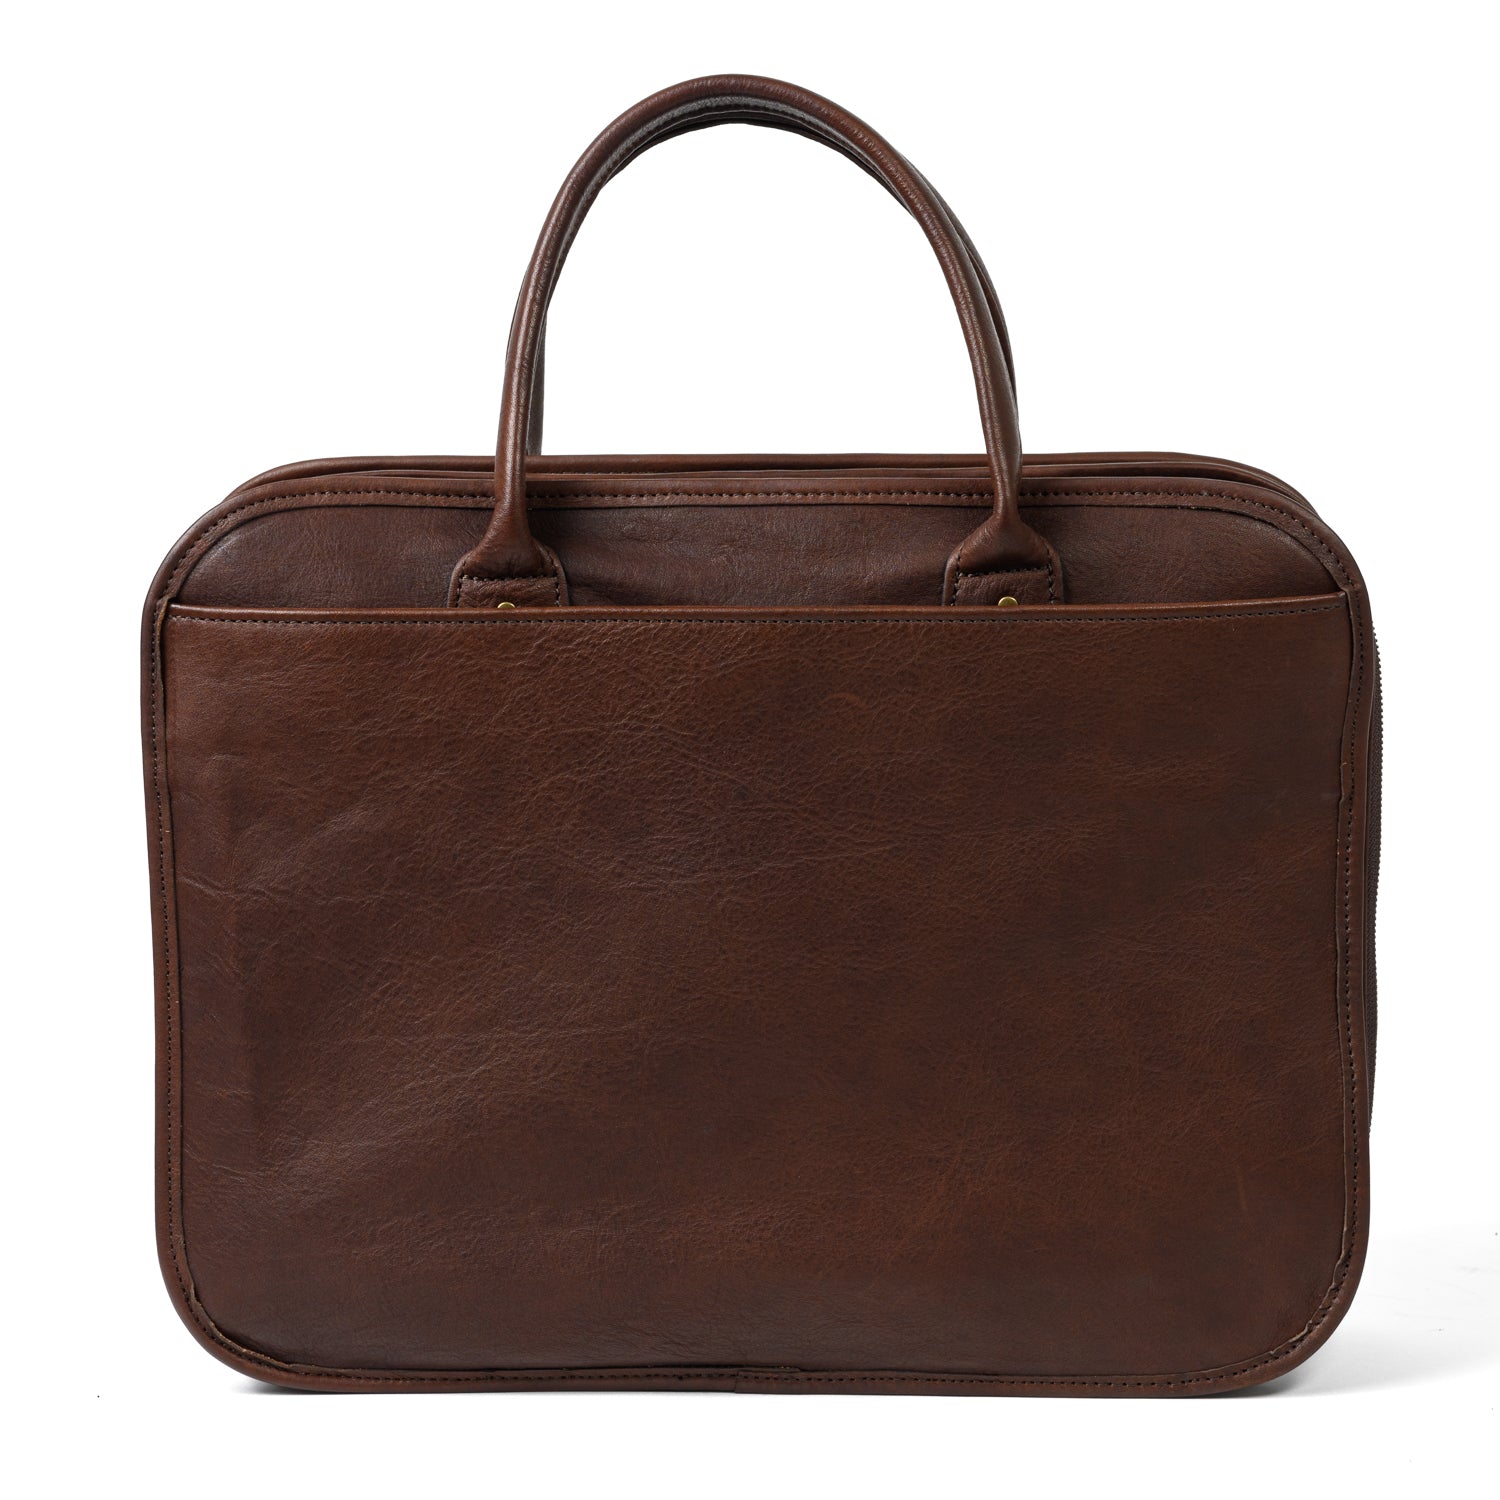 Miller Standard Attache in Seven Hills Chocolate by Moore & Giles